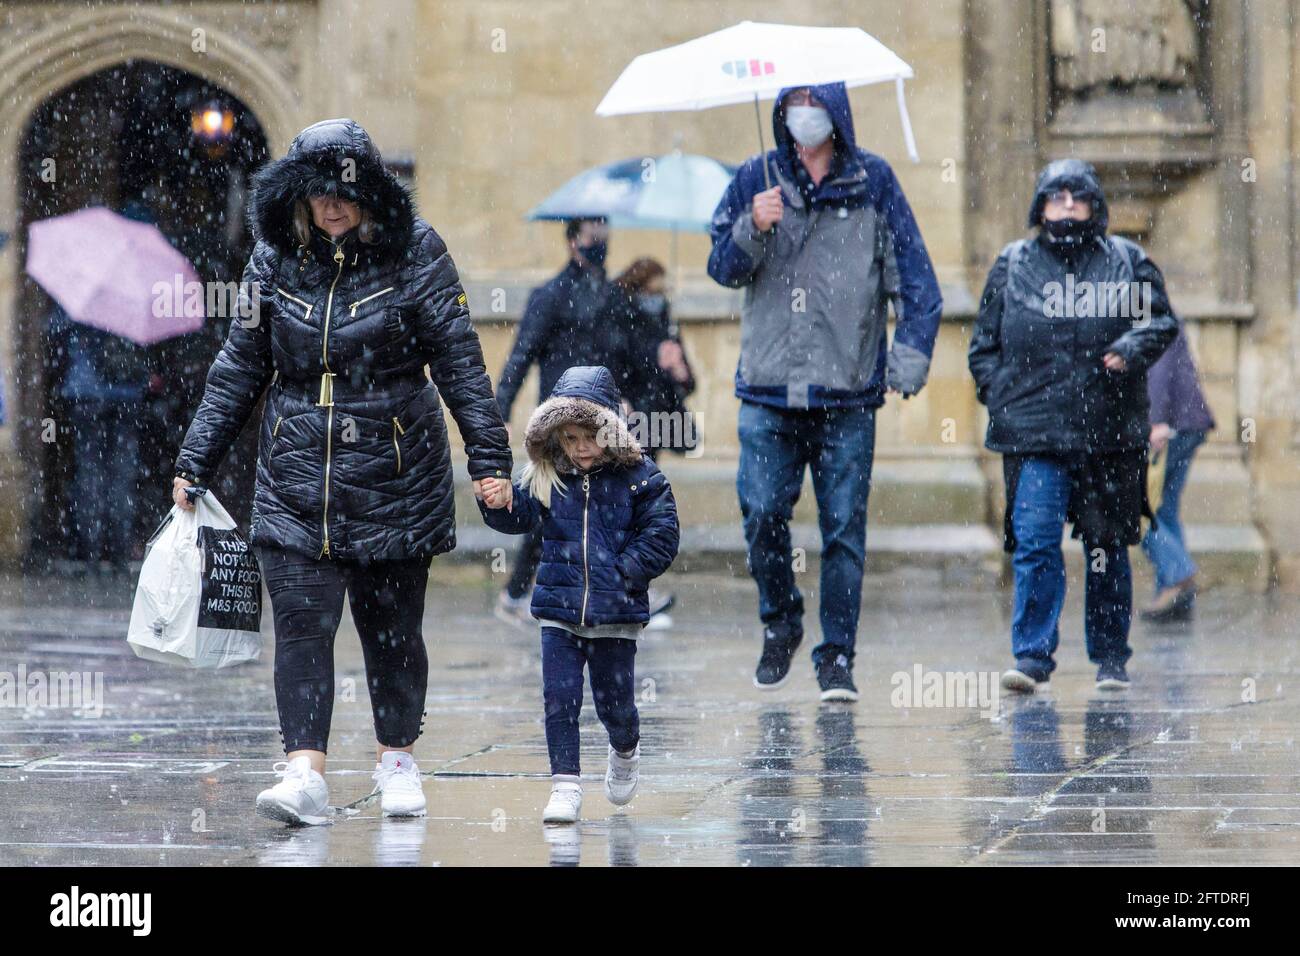 Bath, Somerset, UK. 21st May, 2021. Shoppers are pictured in Bath as heavy rain showers make their way across the UK.  Credit: Lynchpics/Alamy Live News Stock Photo